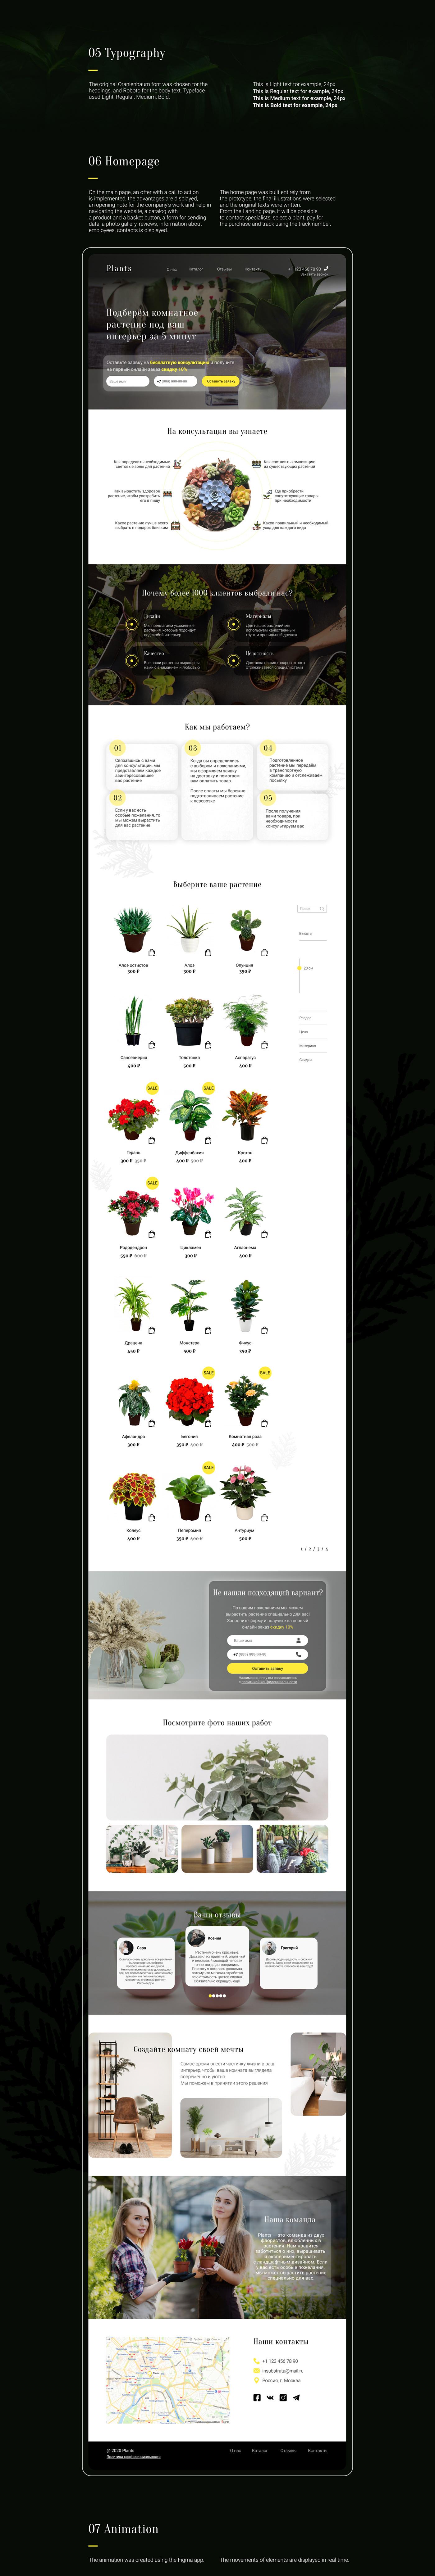 The task was to create a working online store. UX/UI, online store, plants, site, animation.